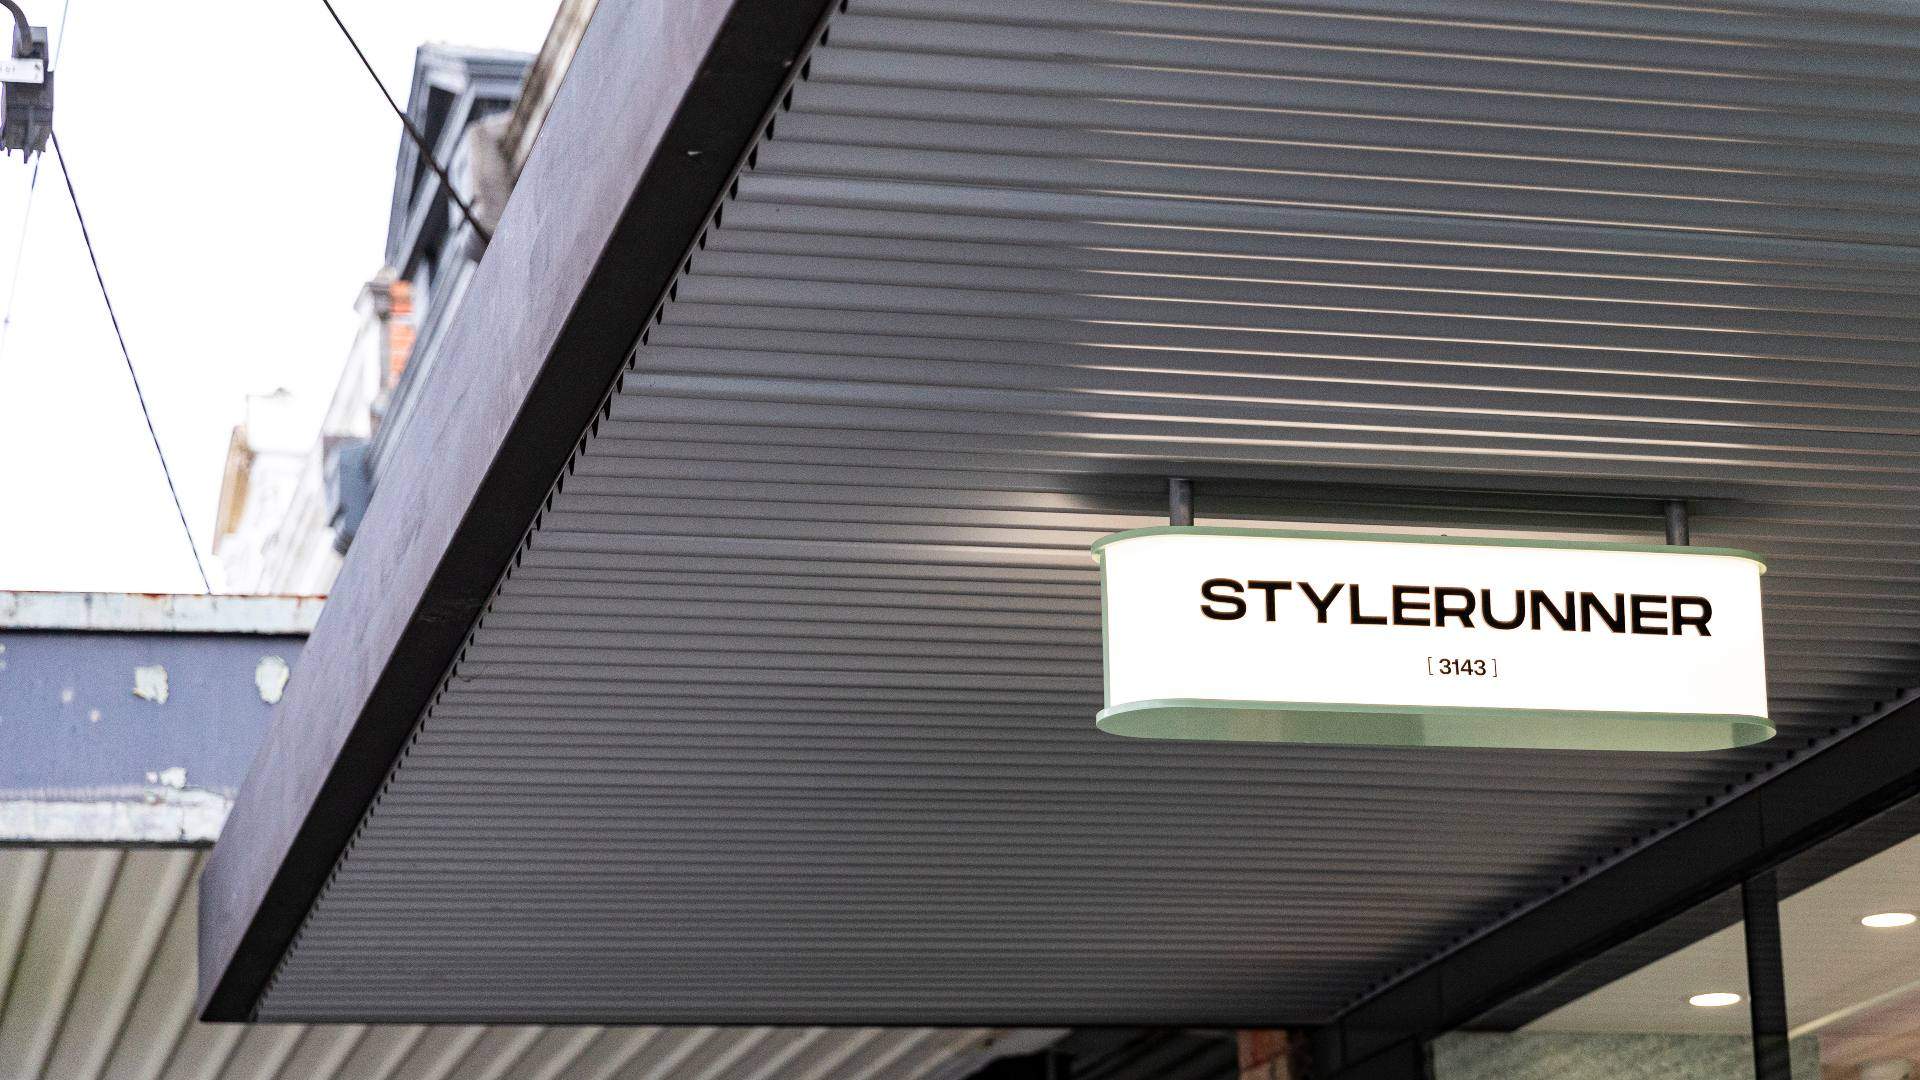 Online Retailer Stylerunner Has Opened Its First-Ever Bricks-and-Mortar Store in Melbourne